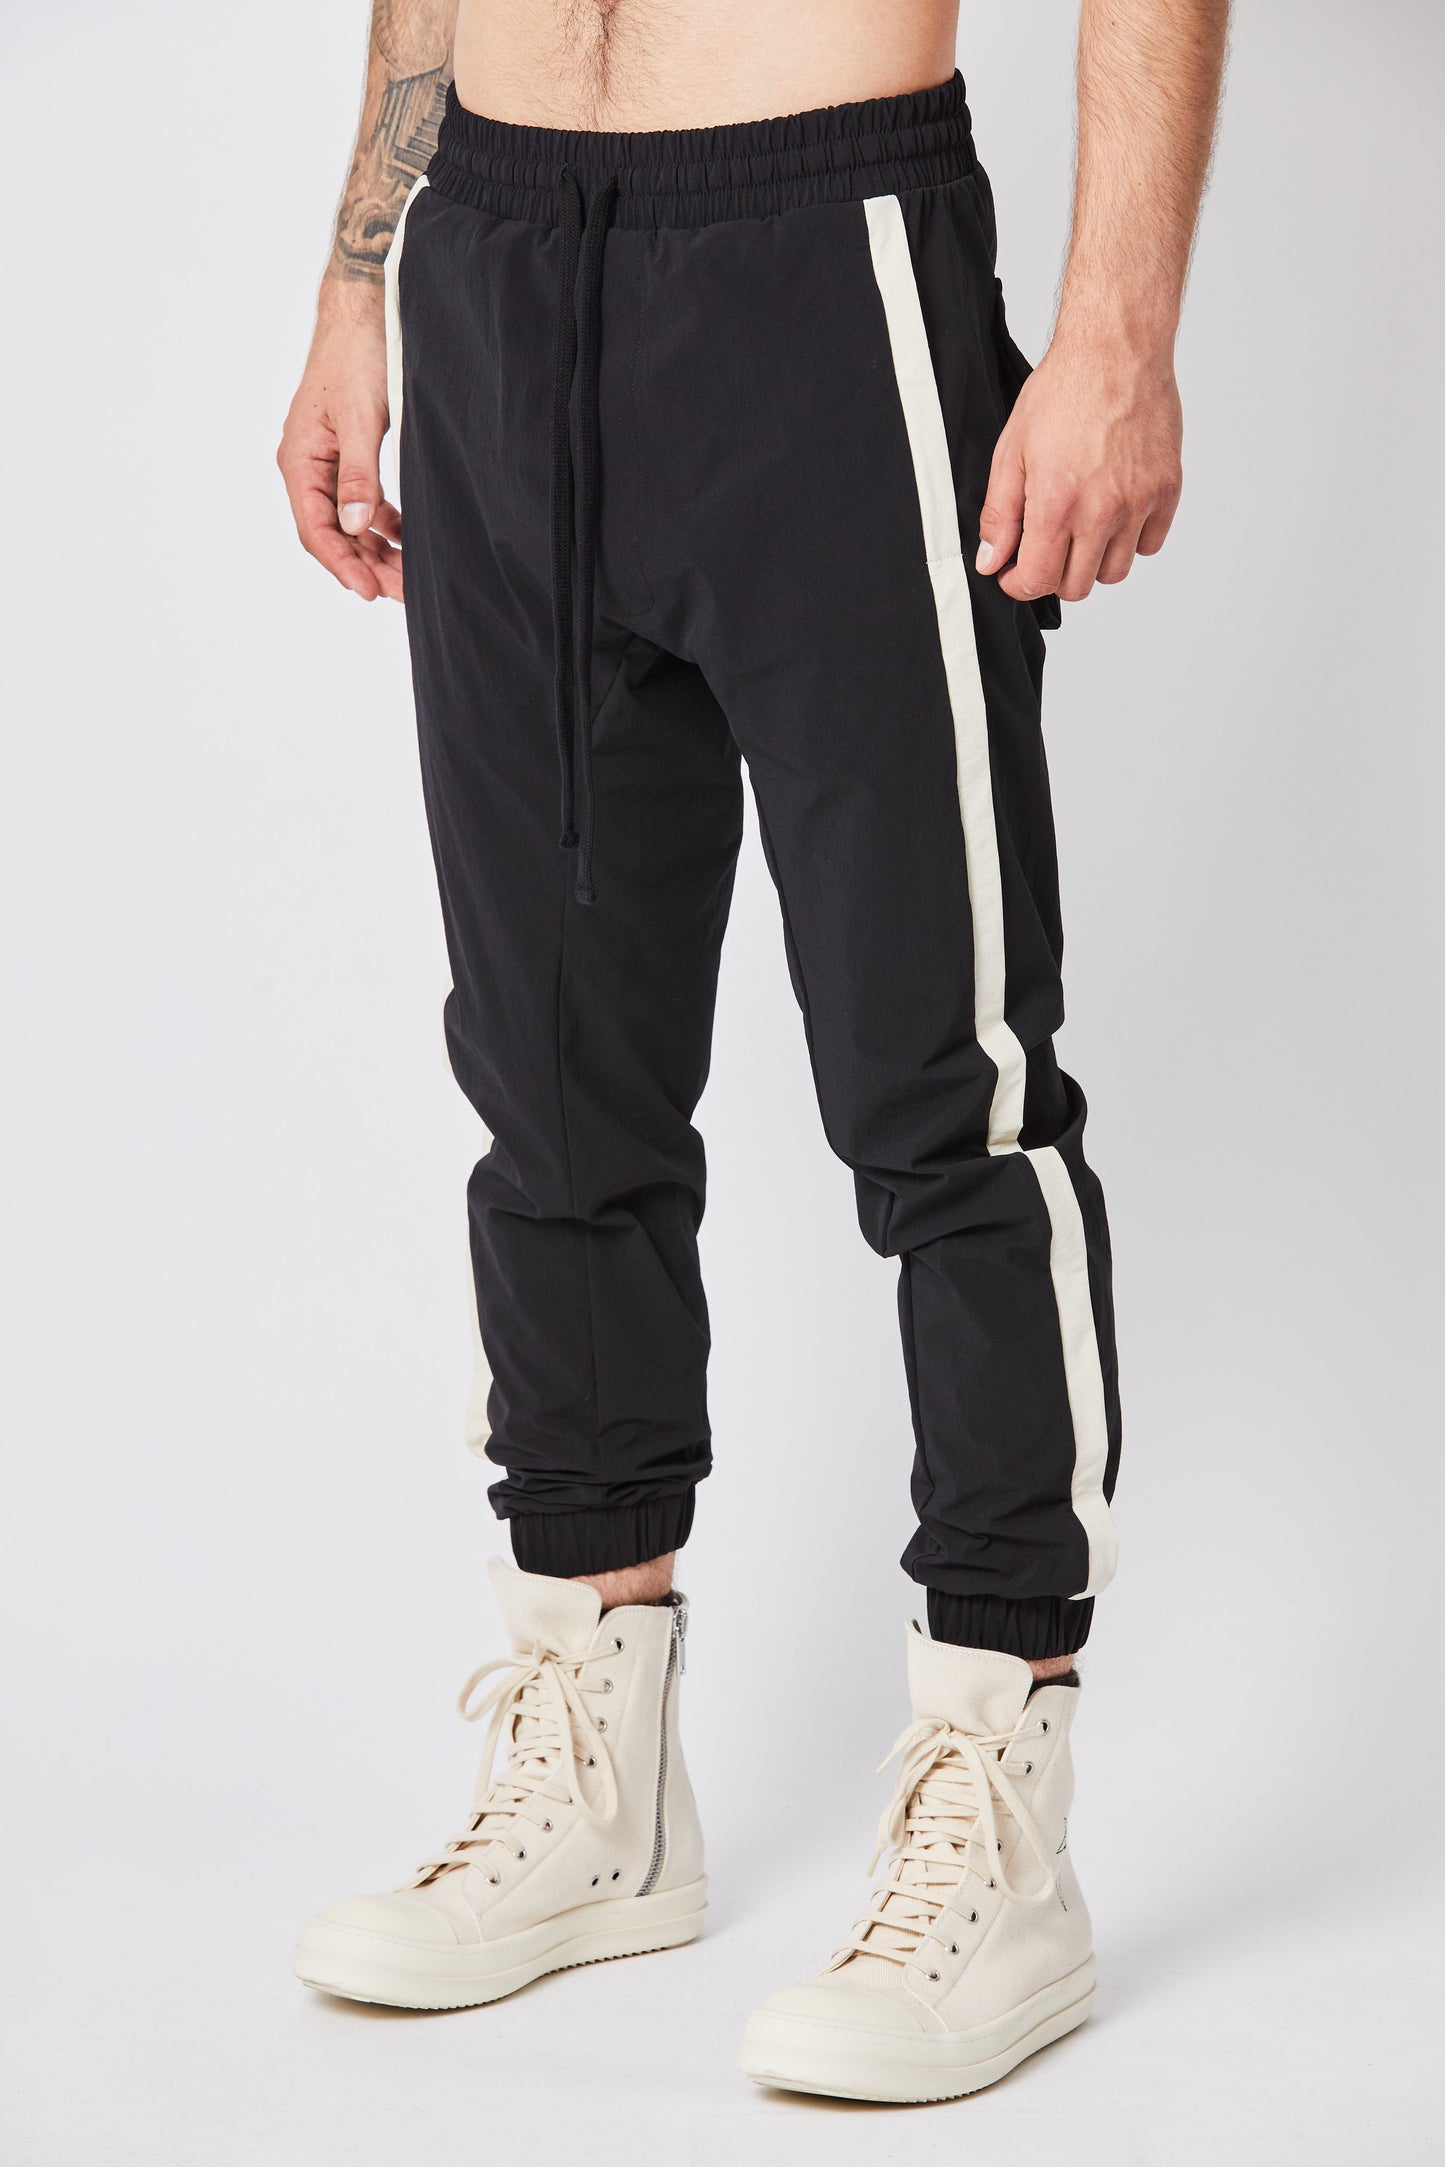 Black with Contrast Side Tape Stretch Nylon Drop Crotch Joggers MST 362